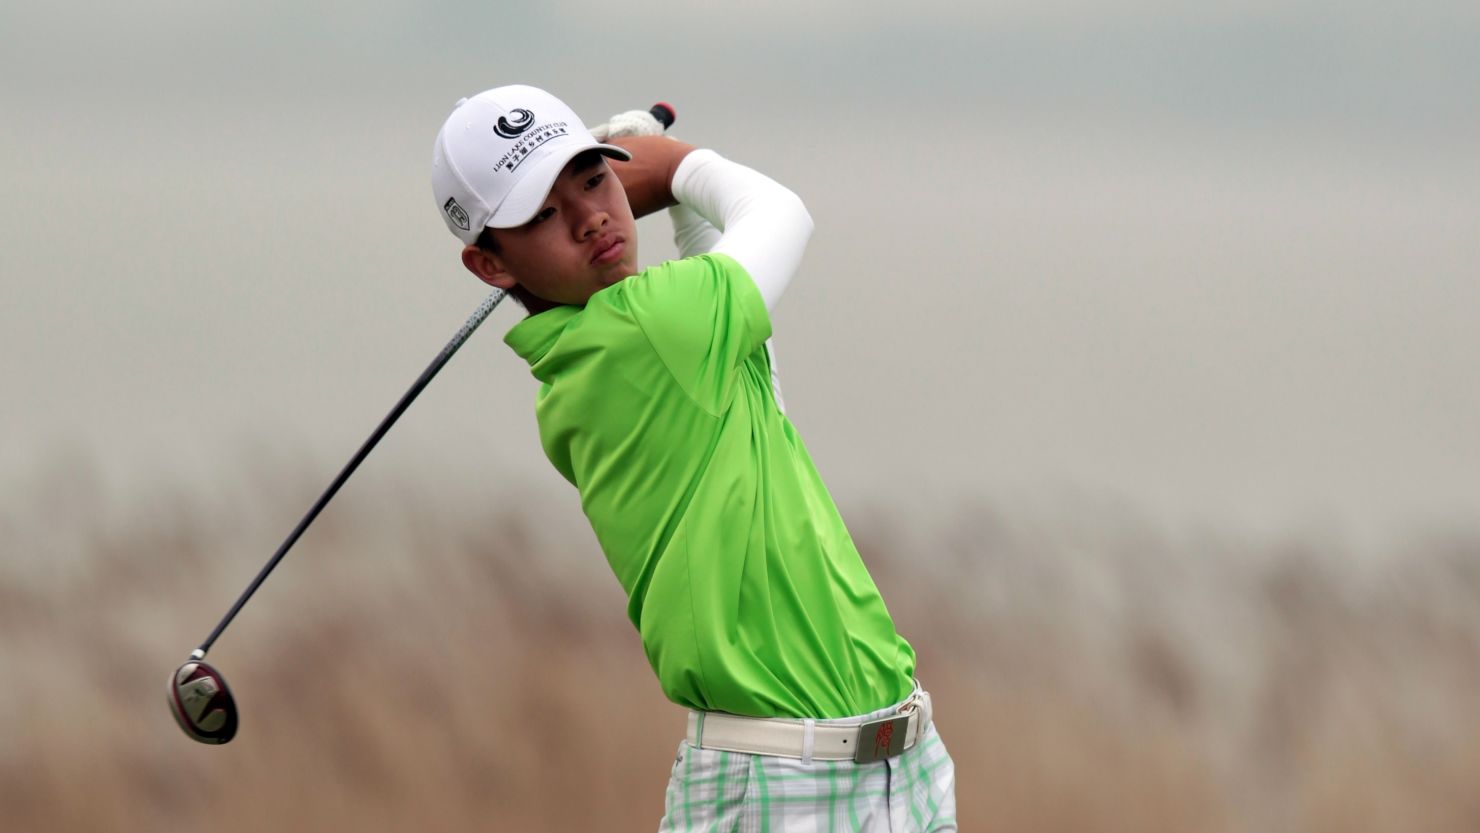 Guan Tian-Lang made history as the youngest player in European Tour history when he teed off at the China Open